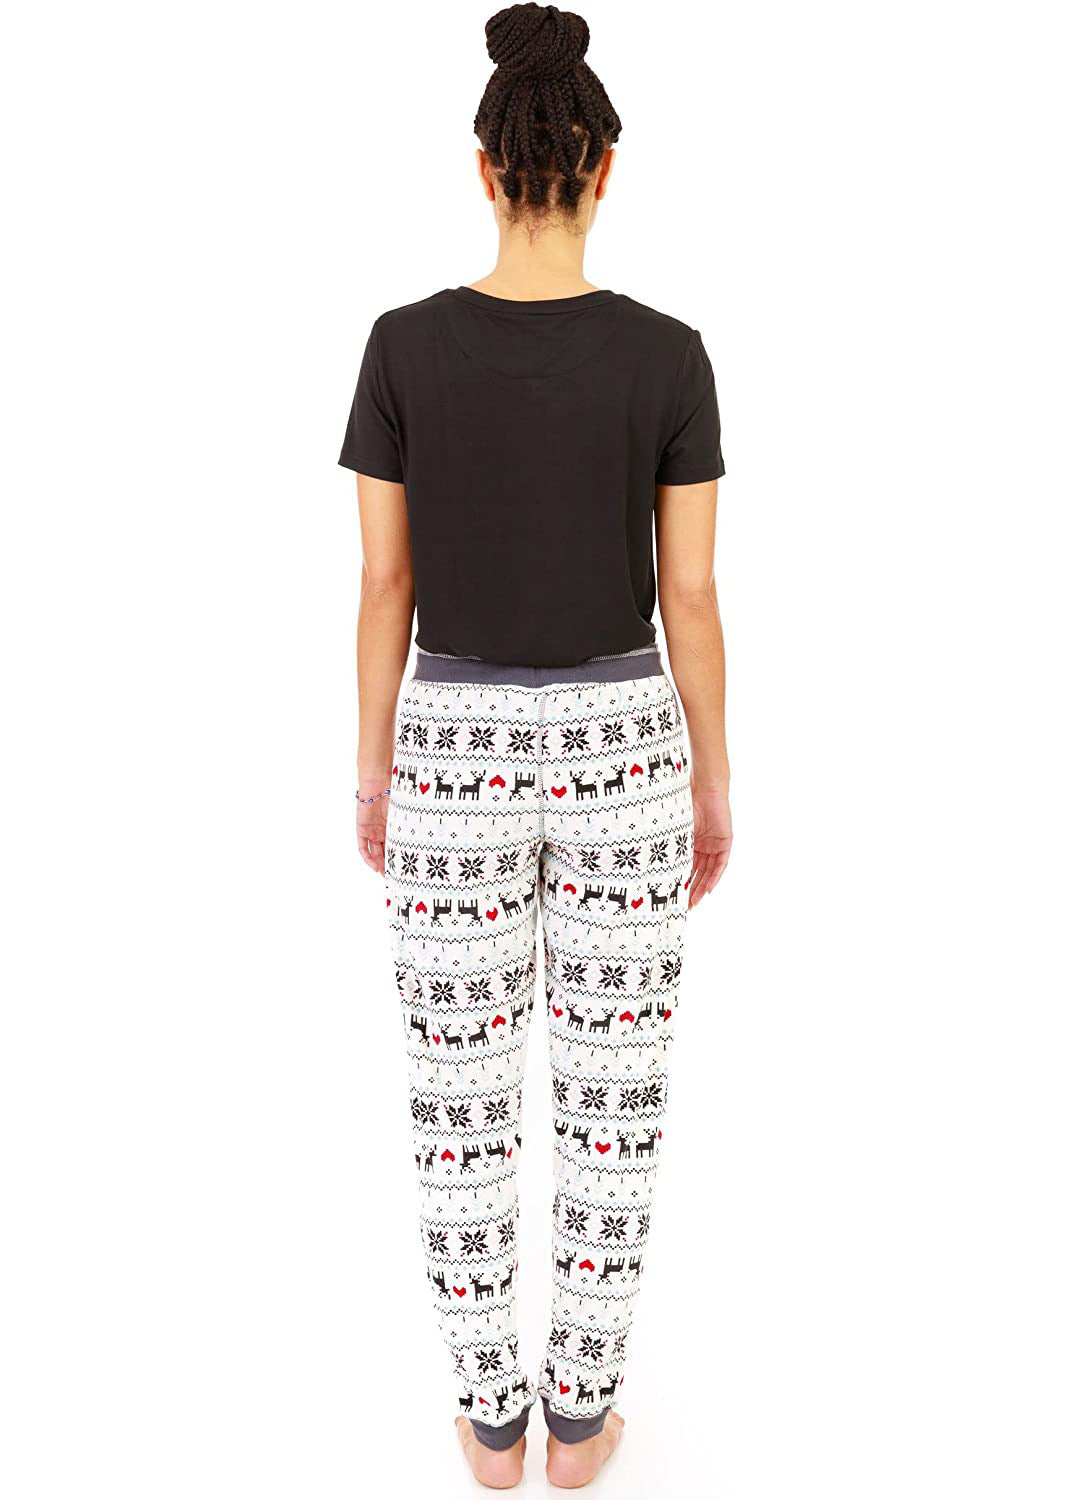 
                  
                    PJ joggers with soft velvety texture, stretch, elastic waistband, drawstring, and stylish ankle cuff. This pattern is deers with pixelated heart and snowflake pattern.
                  
                